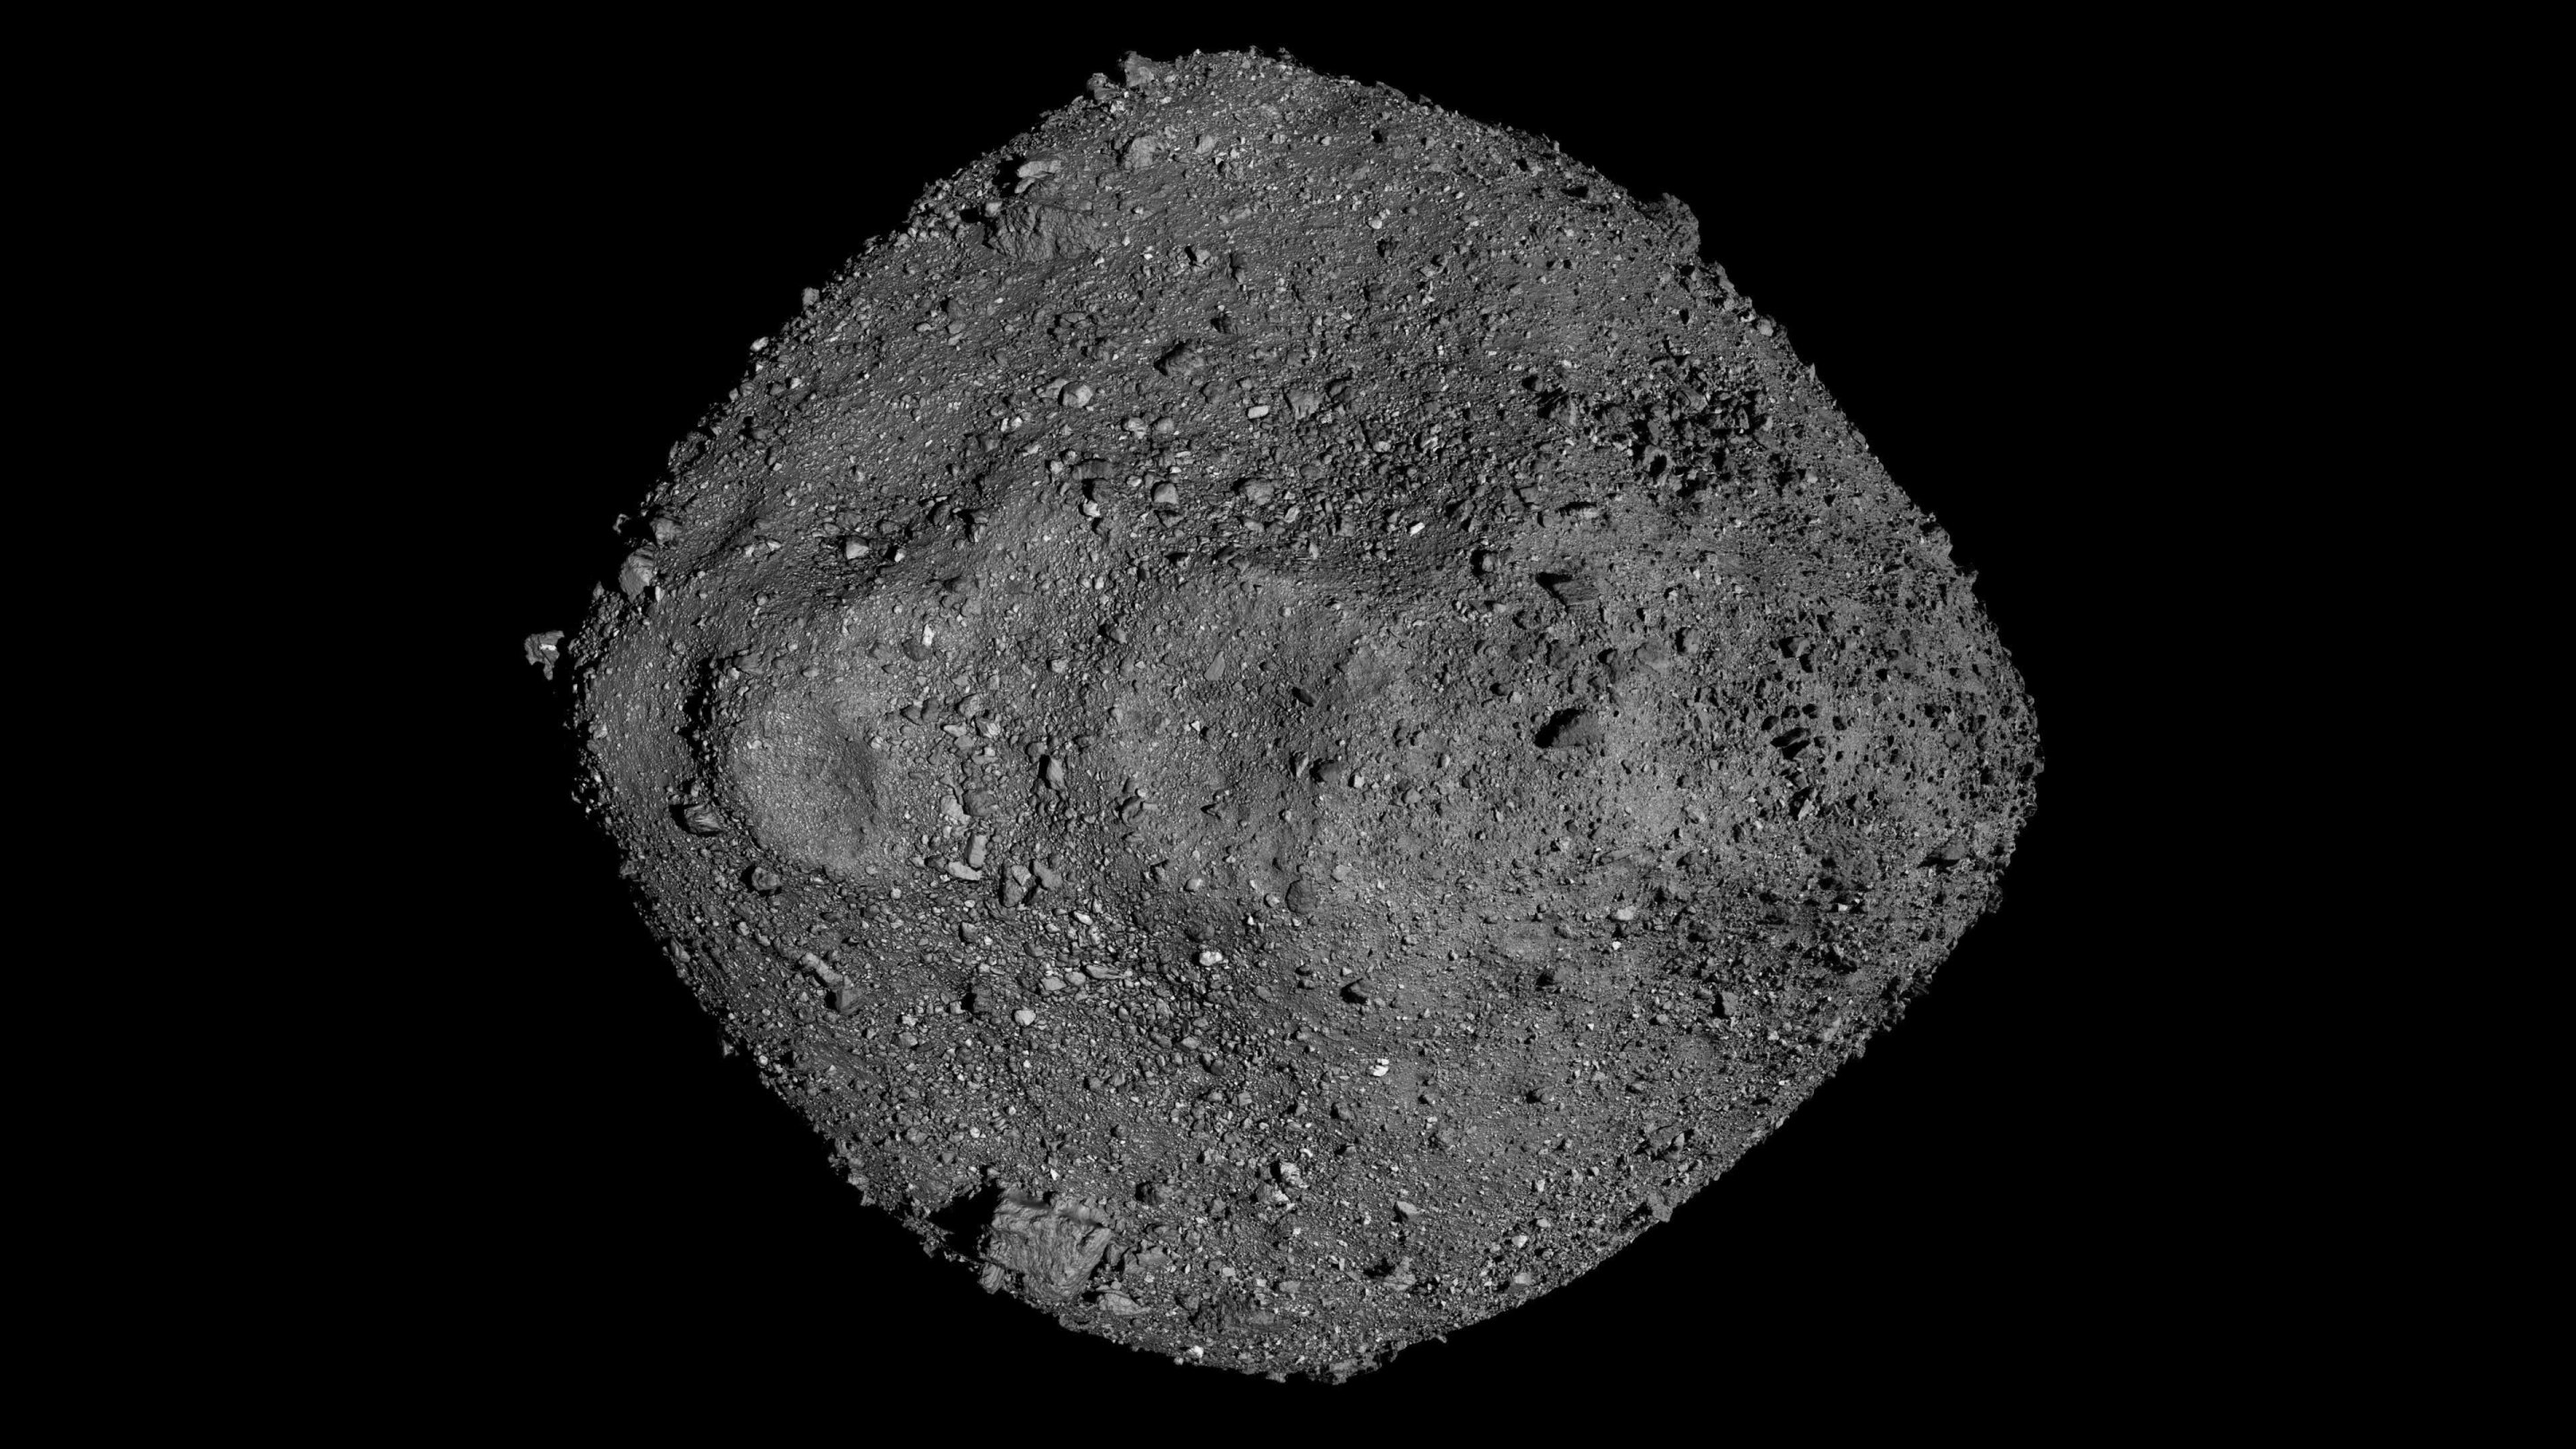 Highly porous rocks are responsible for asteroid Bennu's surprisingly craggy surface